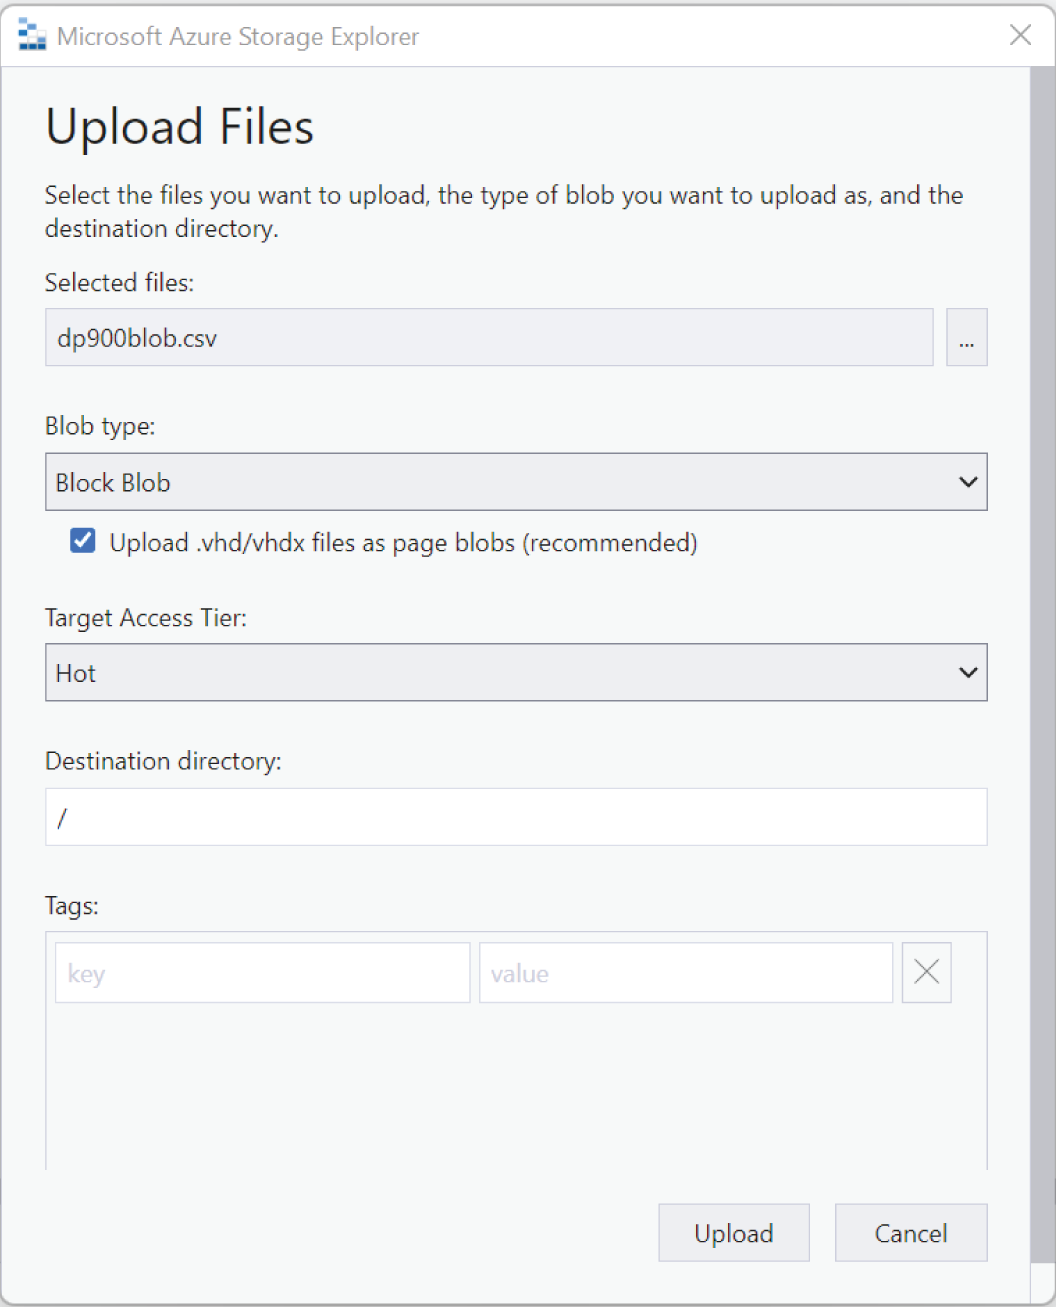 Schematic illustration of Upload Files pop-up page